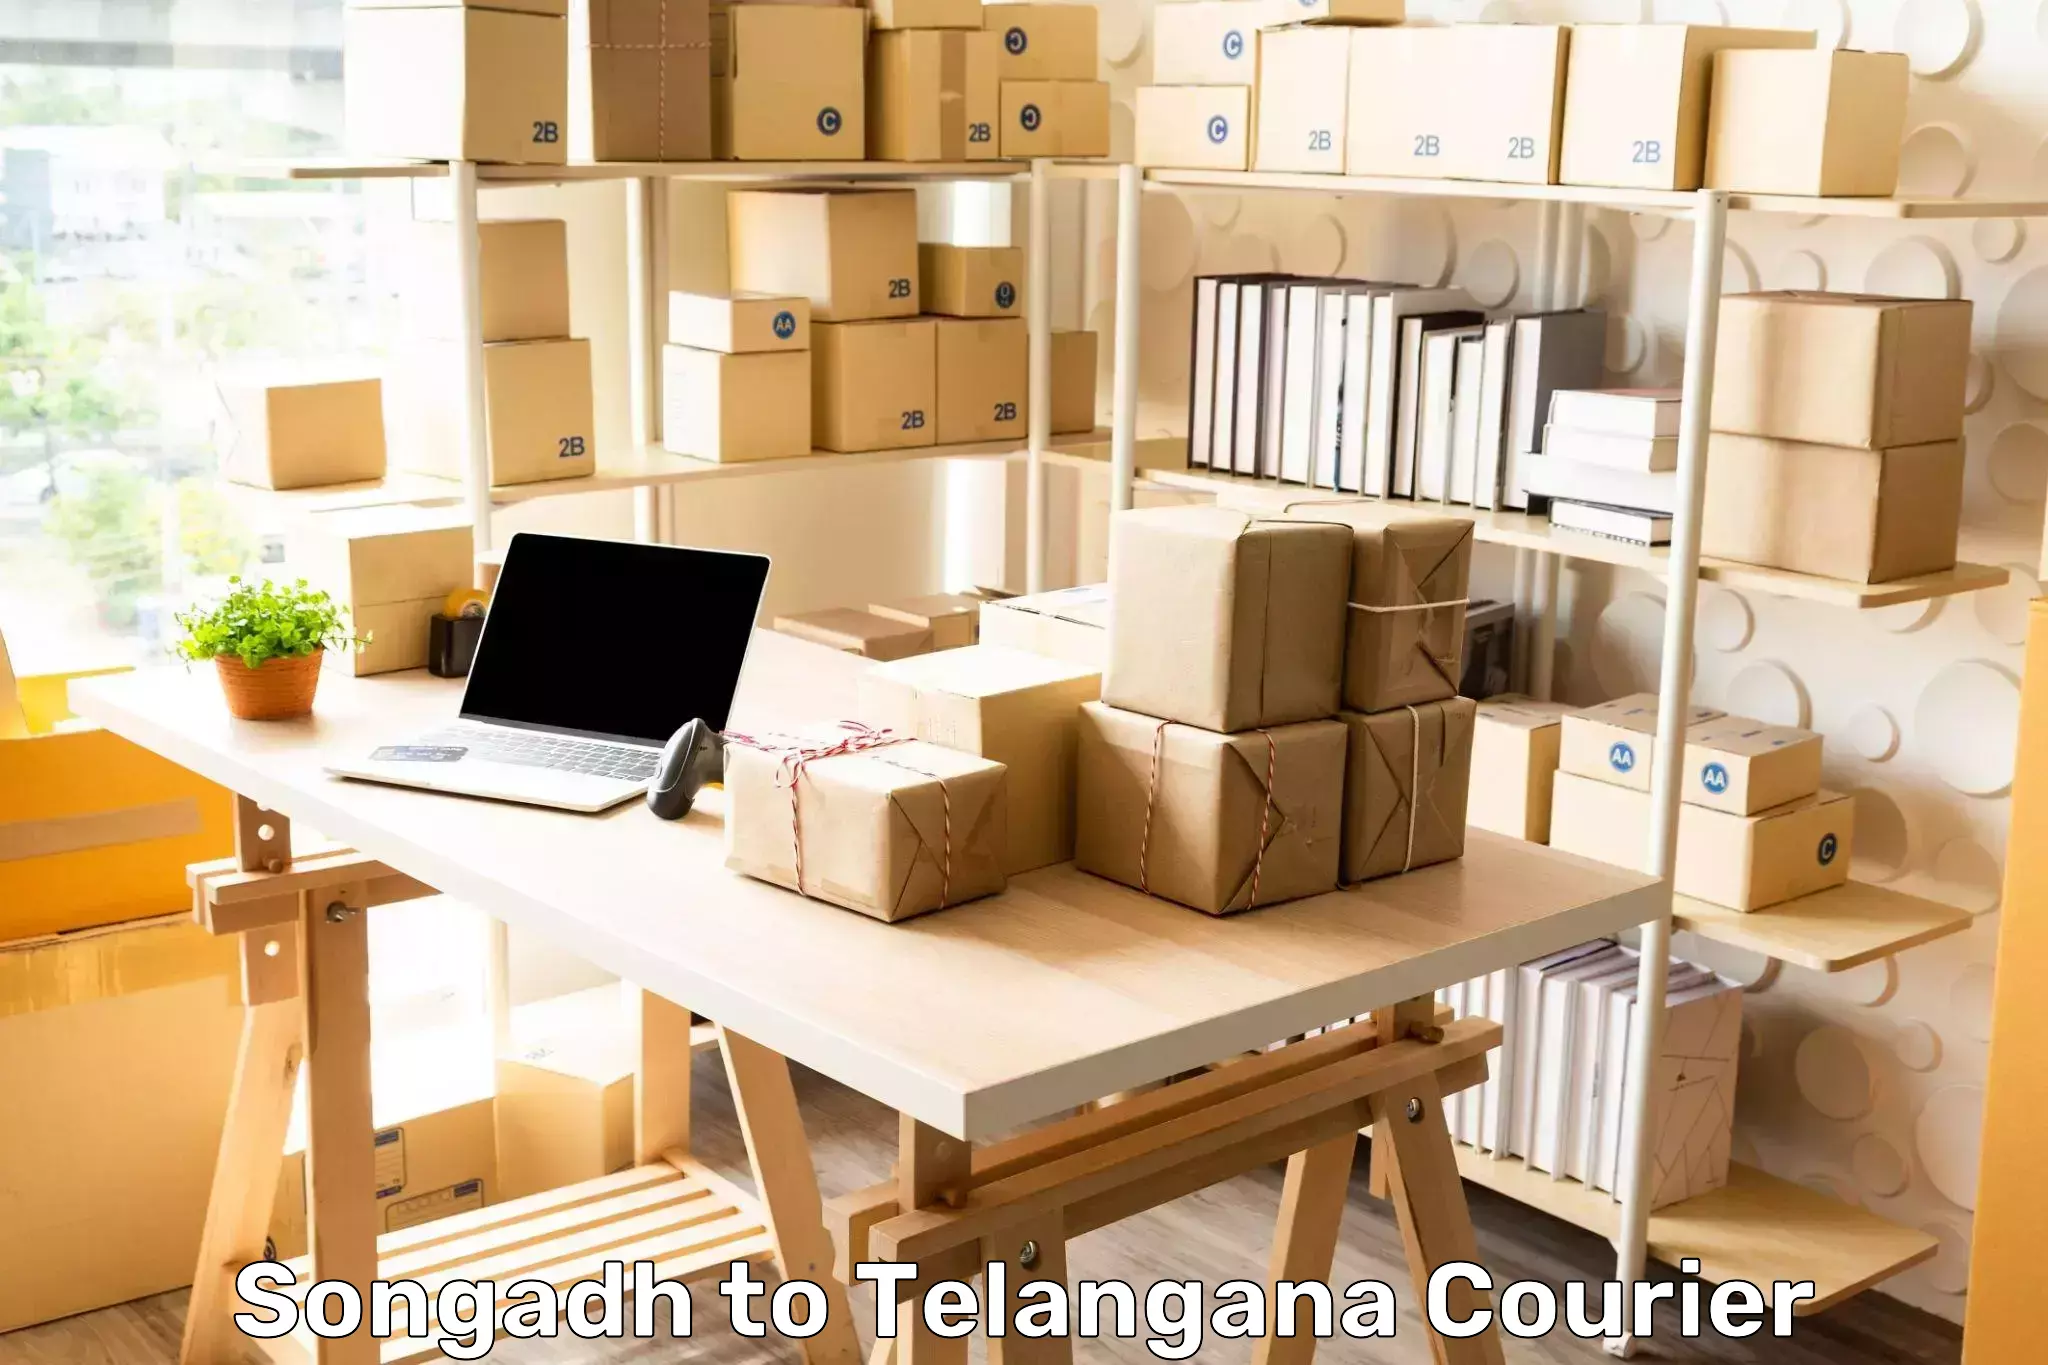 Urban courier service Songadh to Metpally